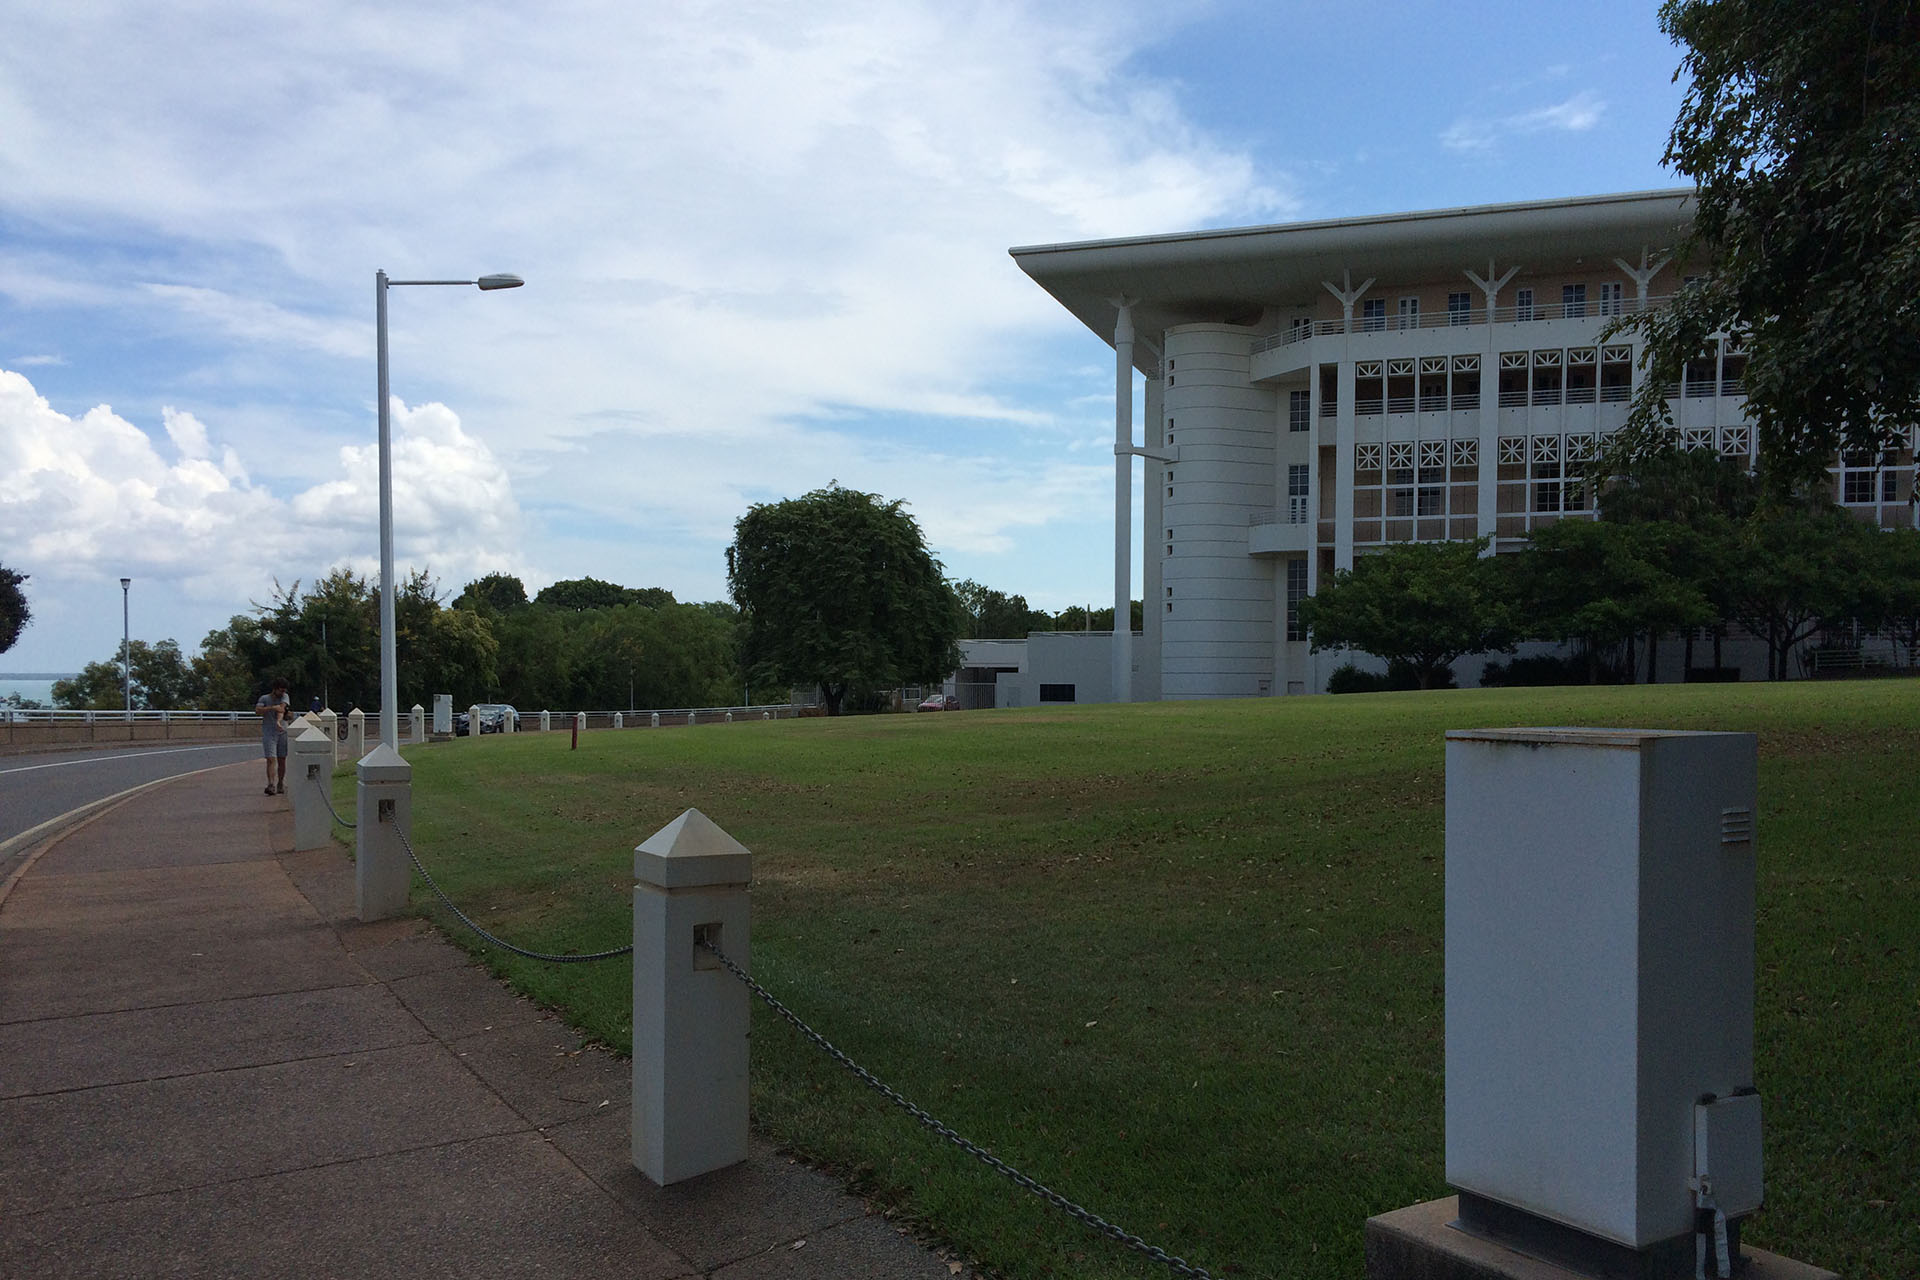 Parliament House of Darwin.